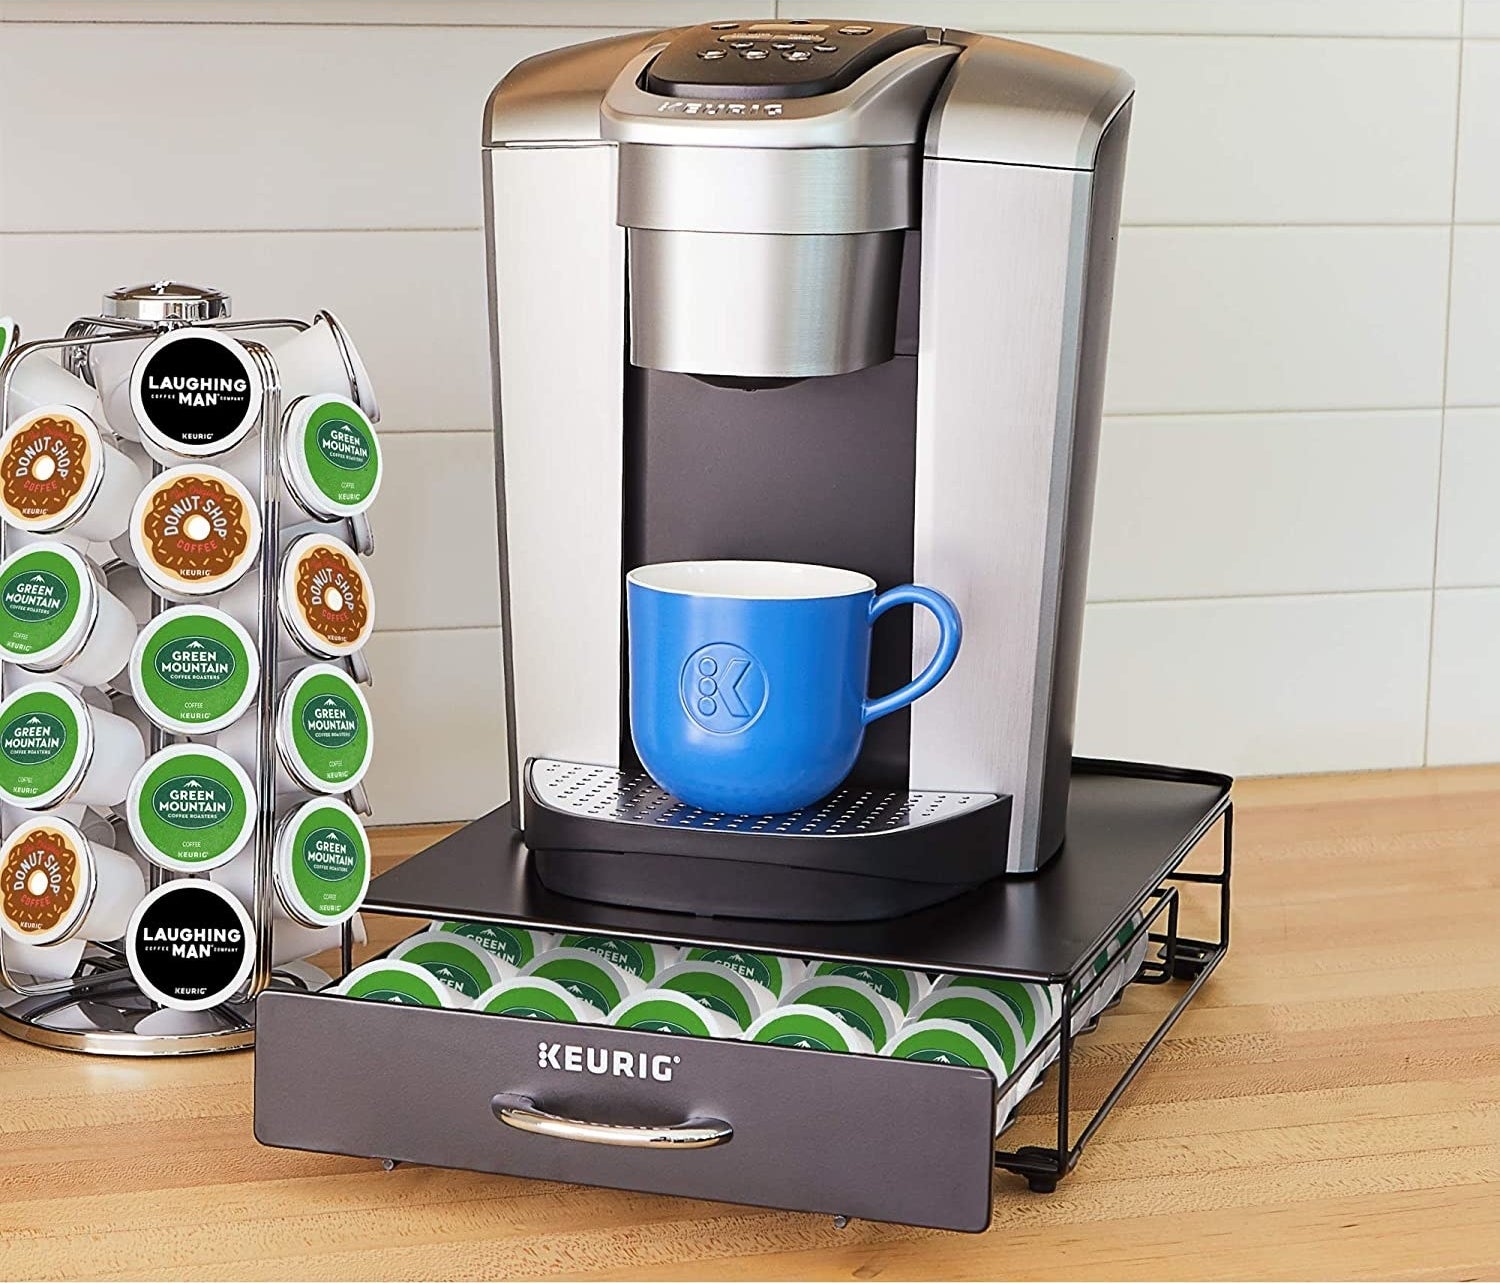 A Keurig coffee maker on a small drawer filled with coffee pods